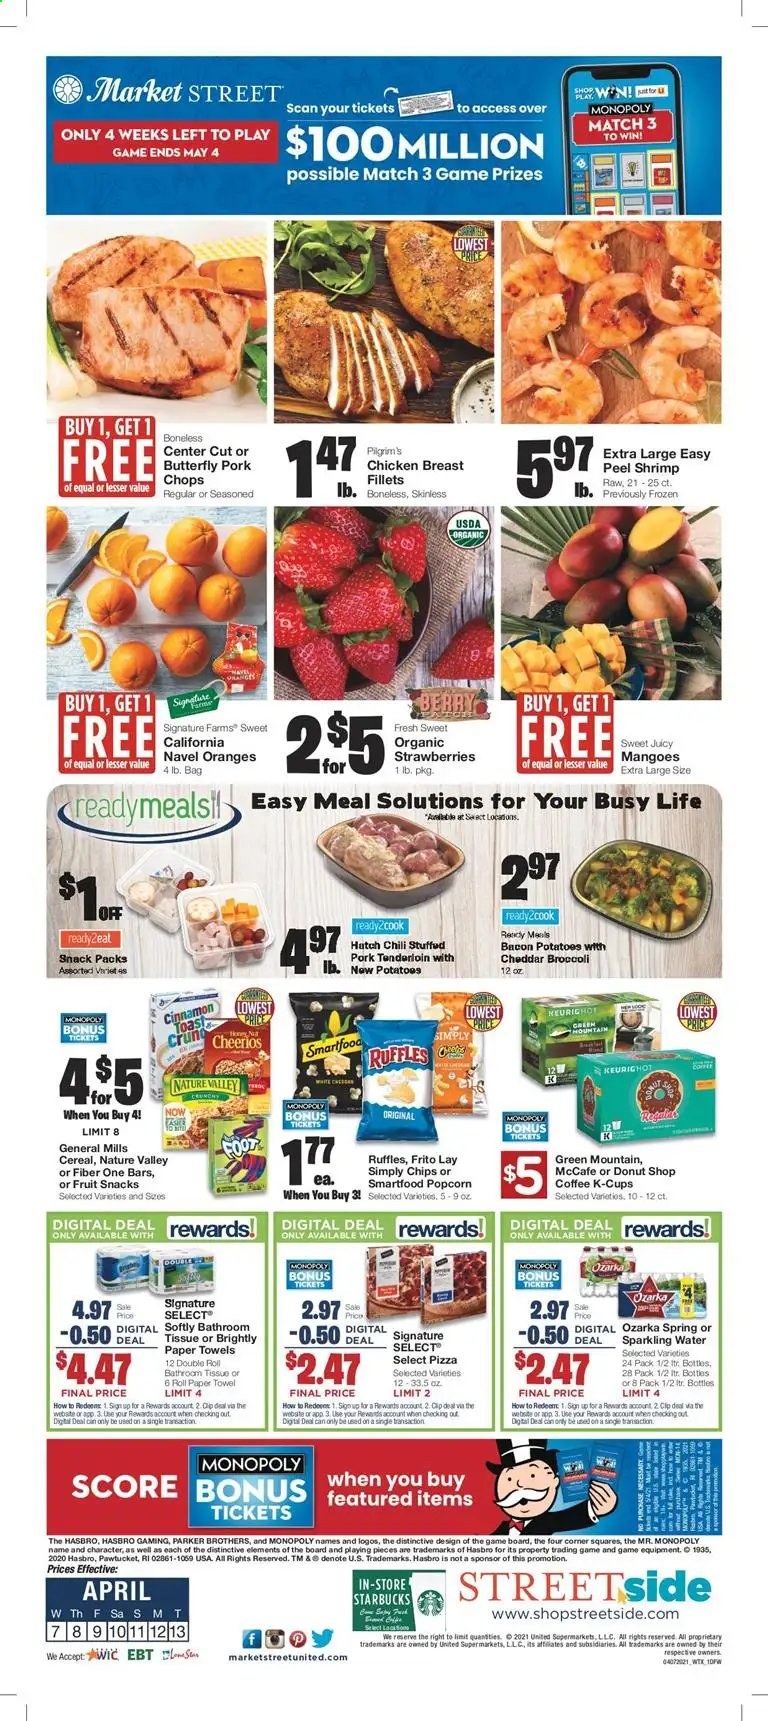 thumbnail - Market Street Flyer - 04/07/2021 - 04/13/2021 - Sales products - mango, strawberries, oranges, shrimps, pizza, bacon, fruit snack, Smartfood, popcorn, Ruffles, cereals, Cheerios, Nature Valley, Fiber One, sparkling water, coffee, Starbucks, coffee capsules, McCafe, K-Cups, Green Mountain, chicken breasts, pork chops, pork meat, pork tenderloin, bath tissue, tissues, kitchen towels, paper towels, potatoes, navel oranges. Page 1.